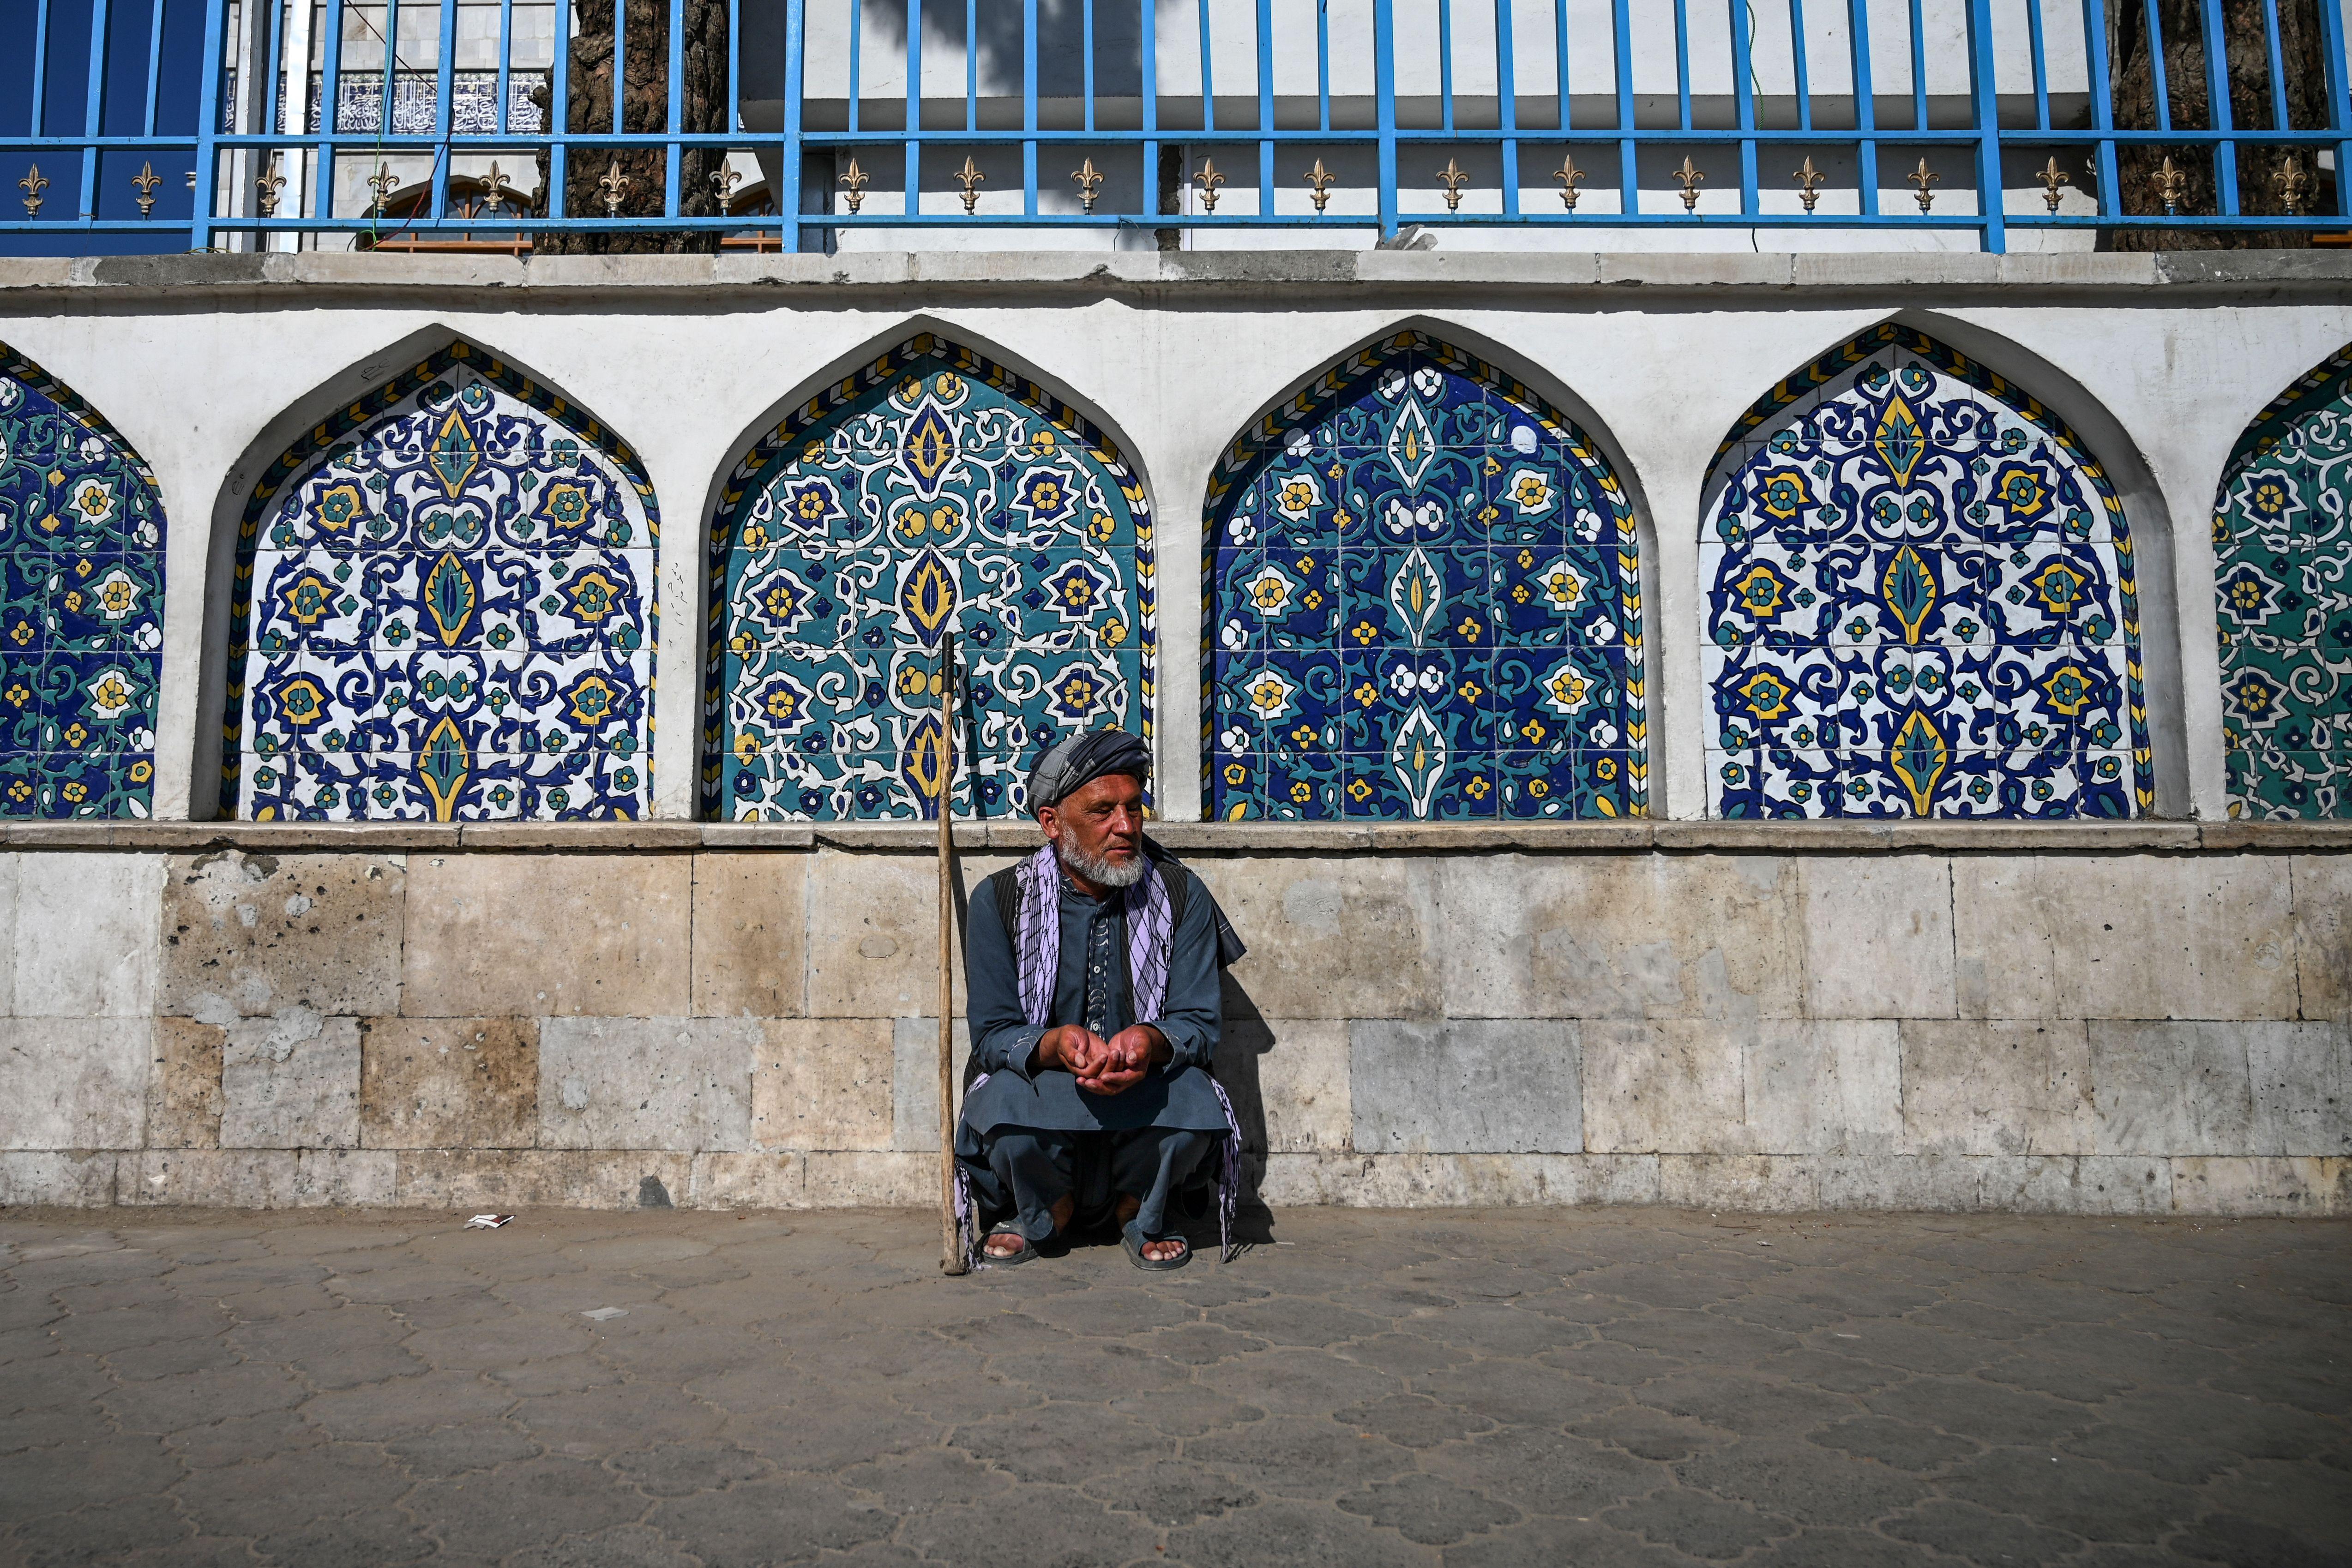 A man squats in front of ornate windows on the exterior of the mosque